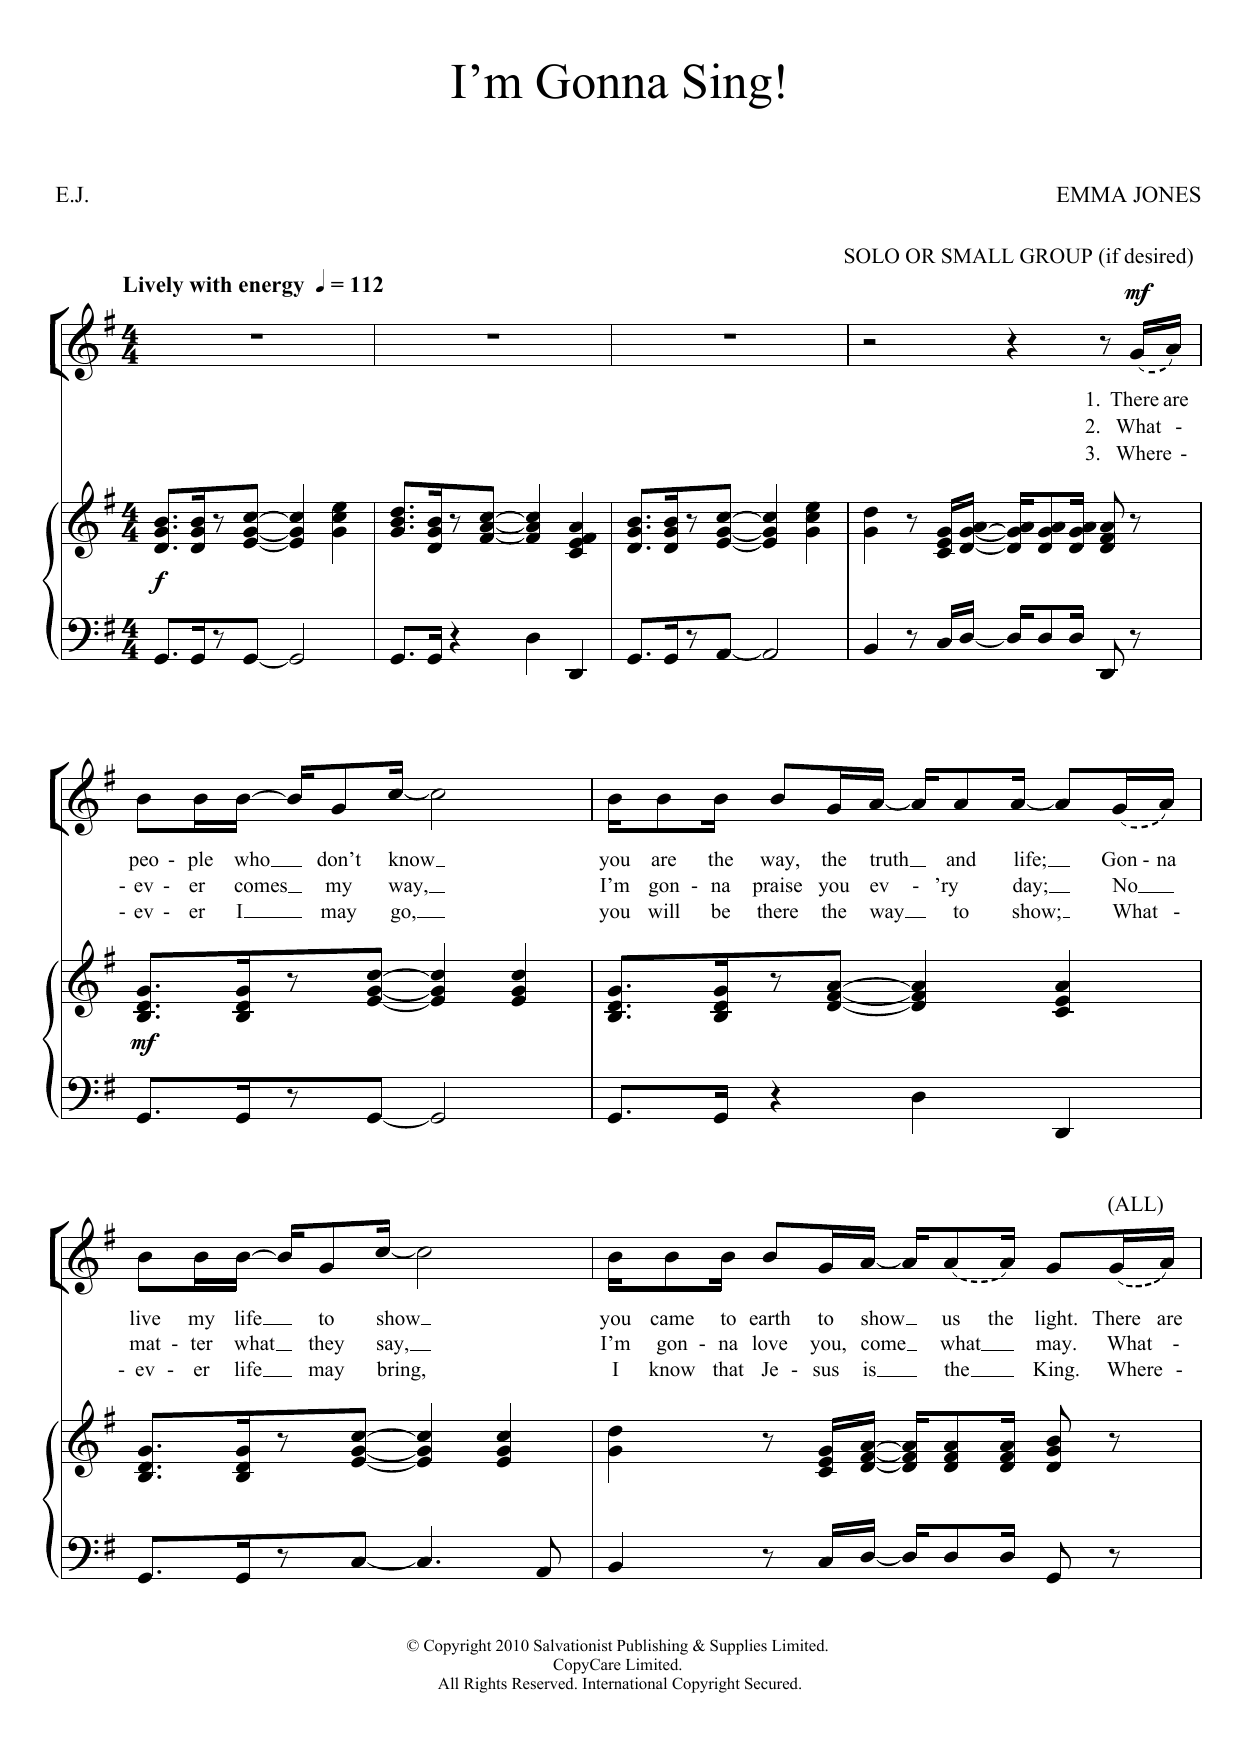 Download The Salvation Army I'm Gonna Sing Sheet Music